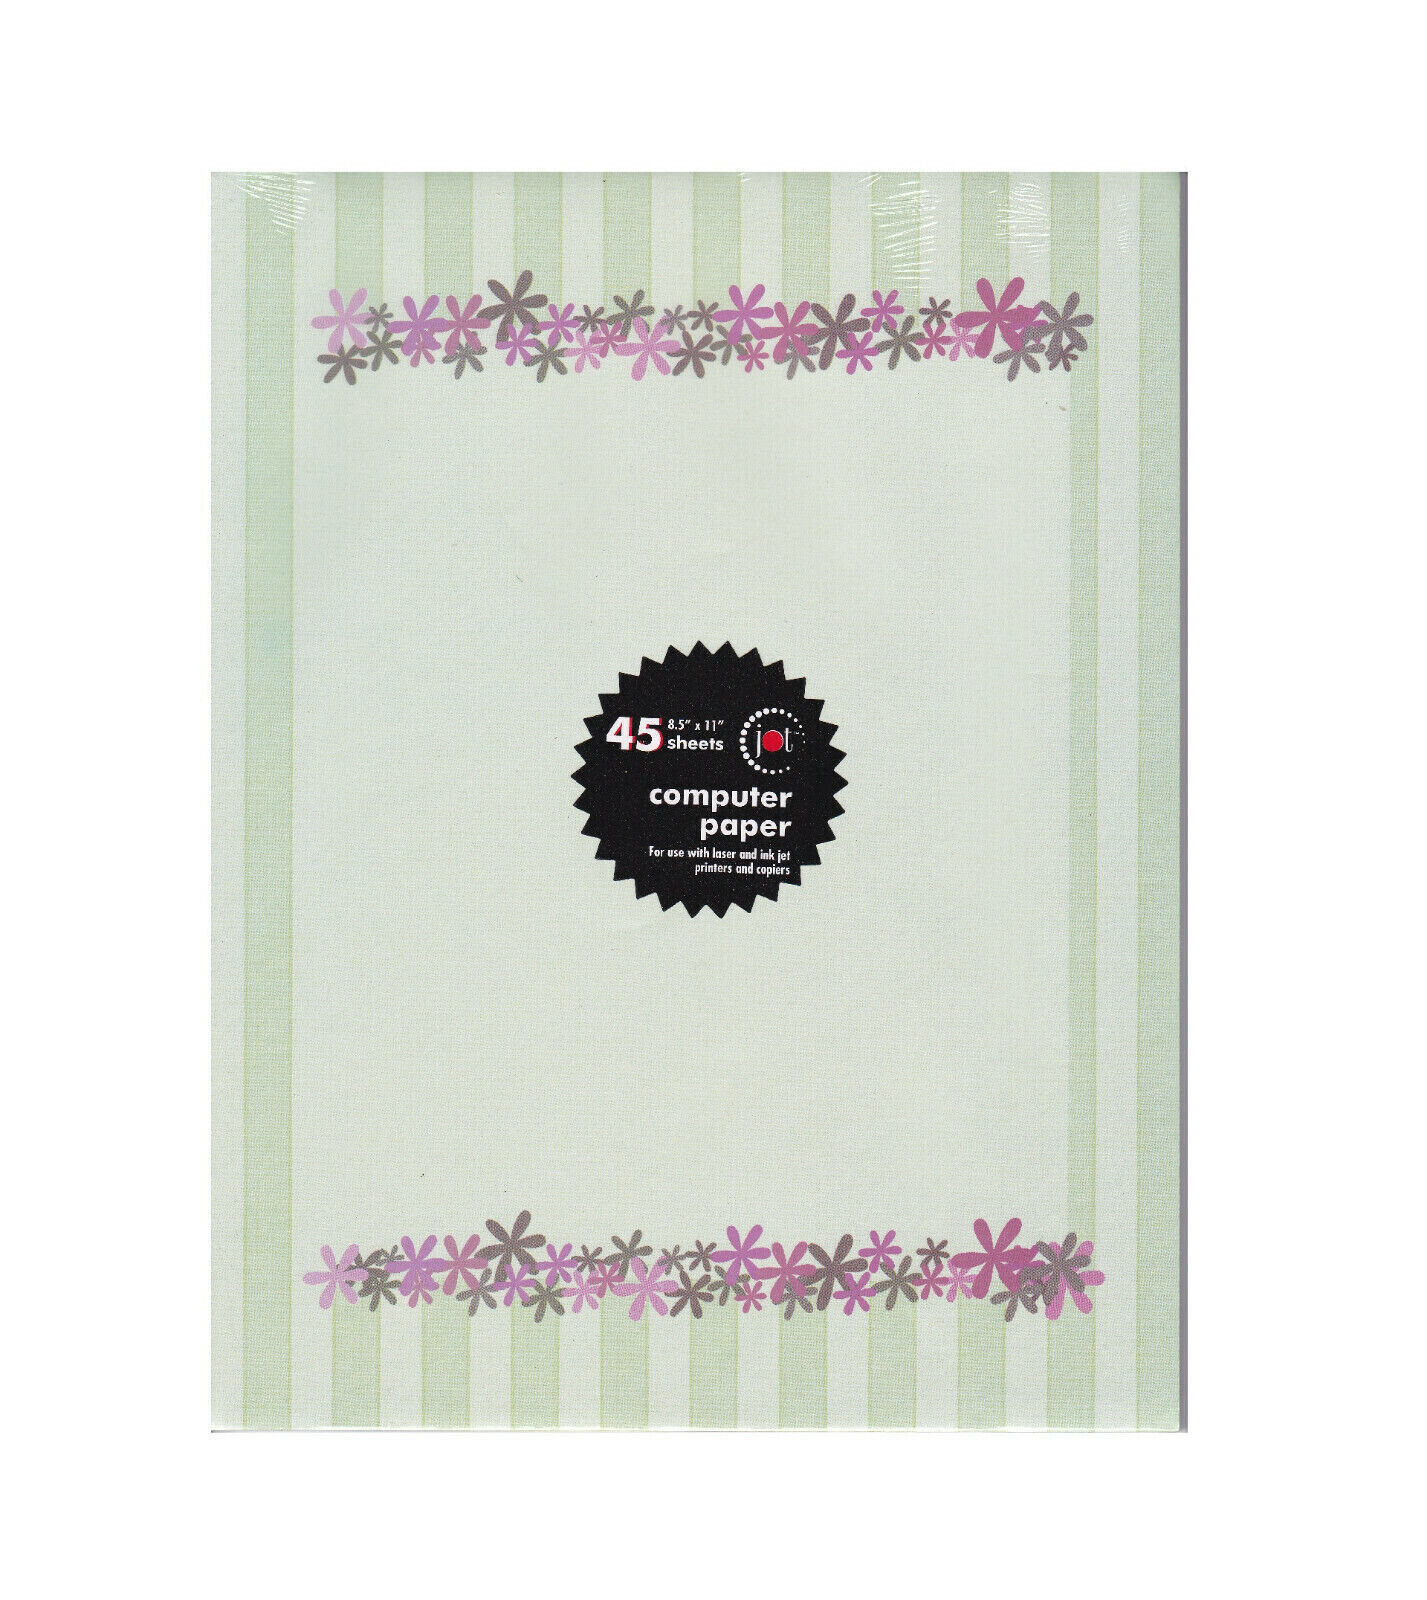 Primary image for Jot Computer Stationery Paper 45 Sheets 8.5" x 11" Green Floral Print